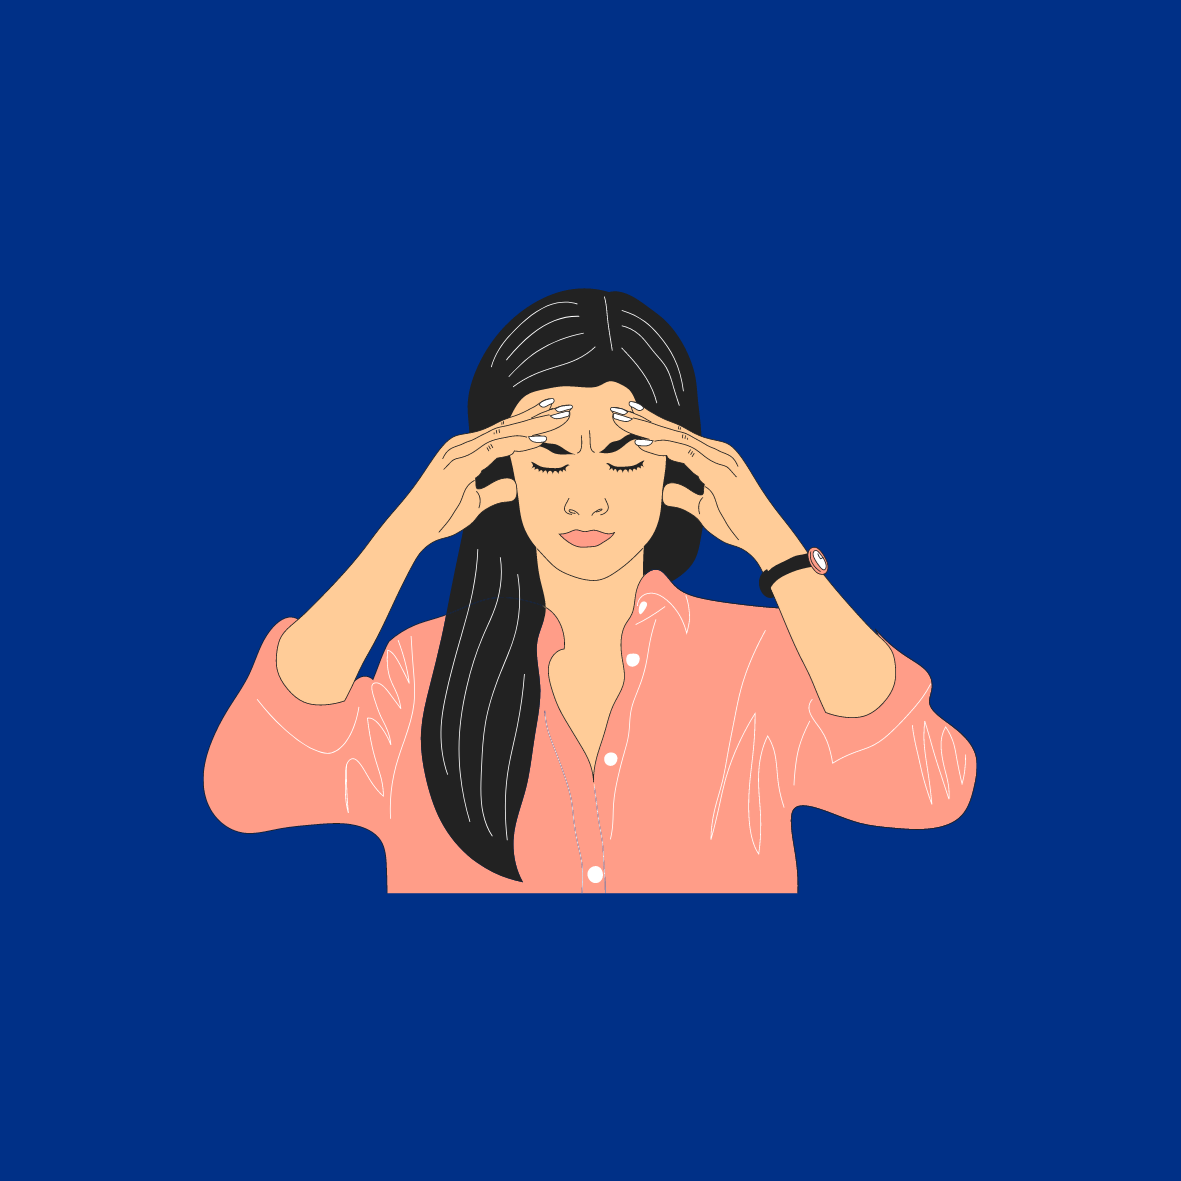 Image Of a Person With a Migraine